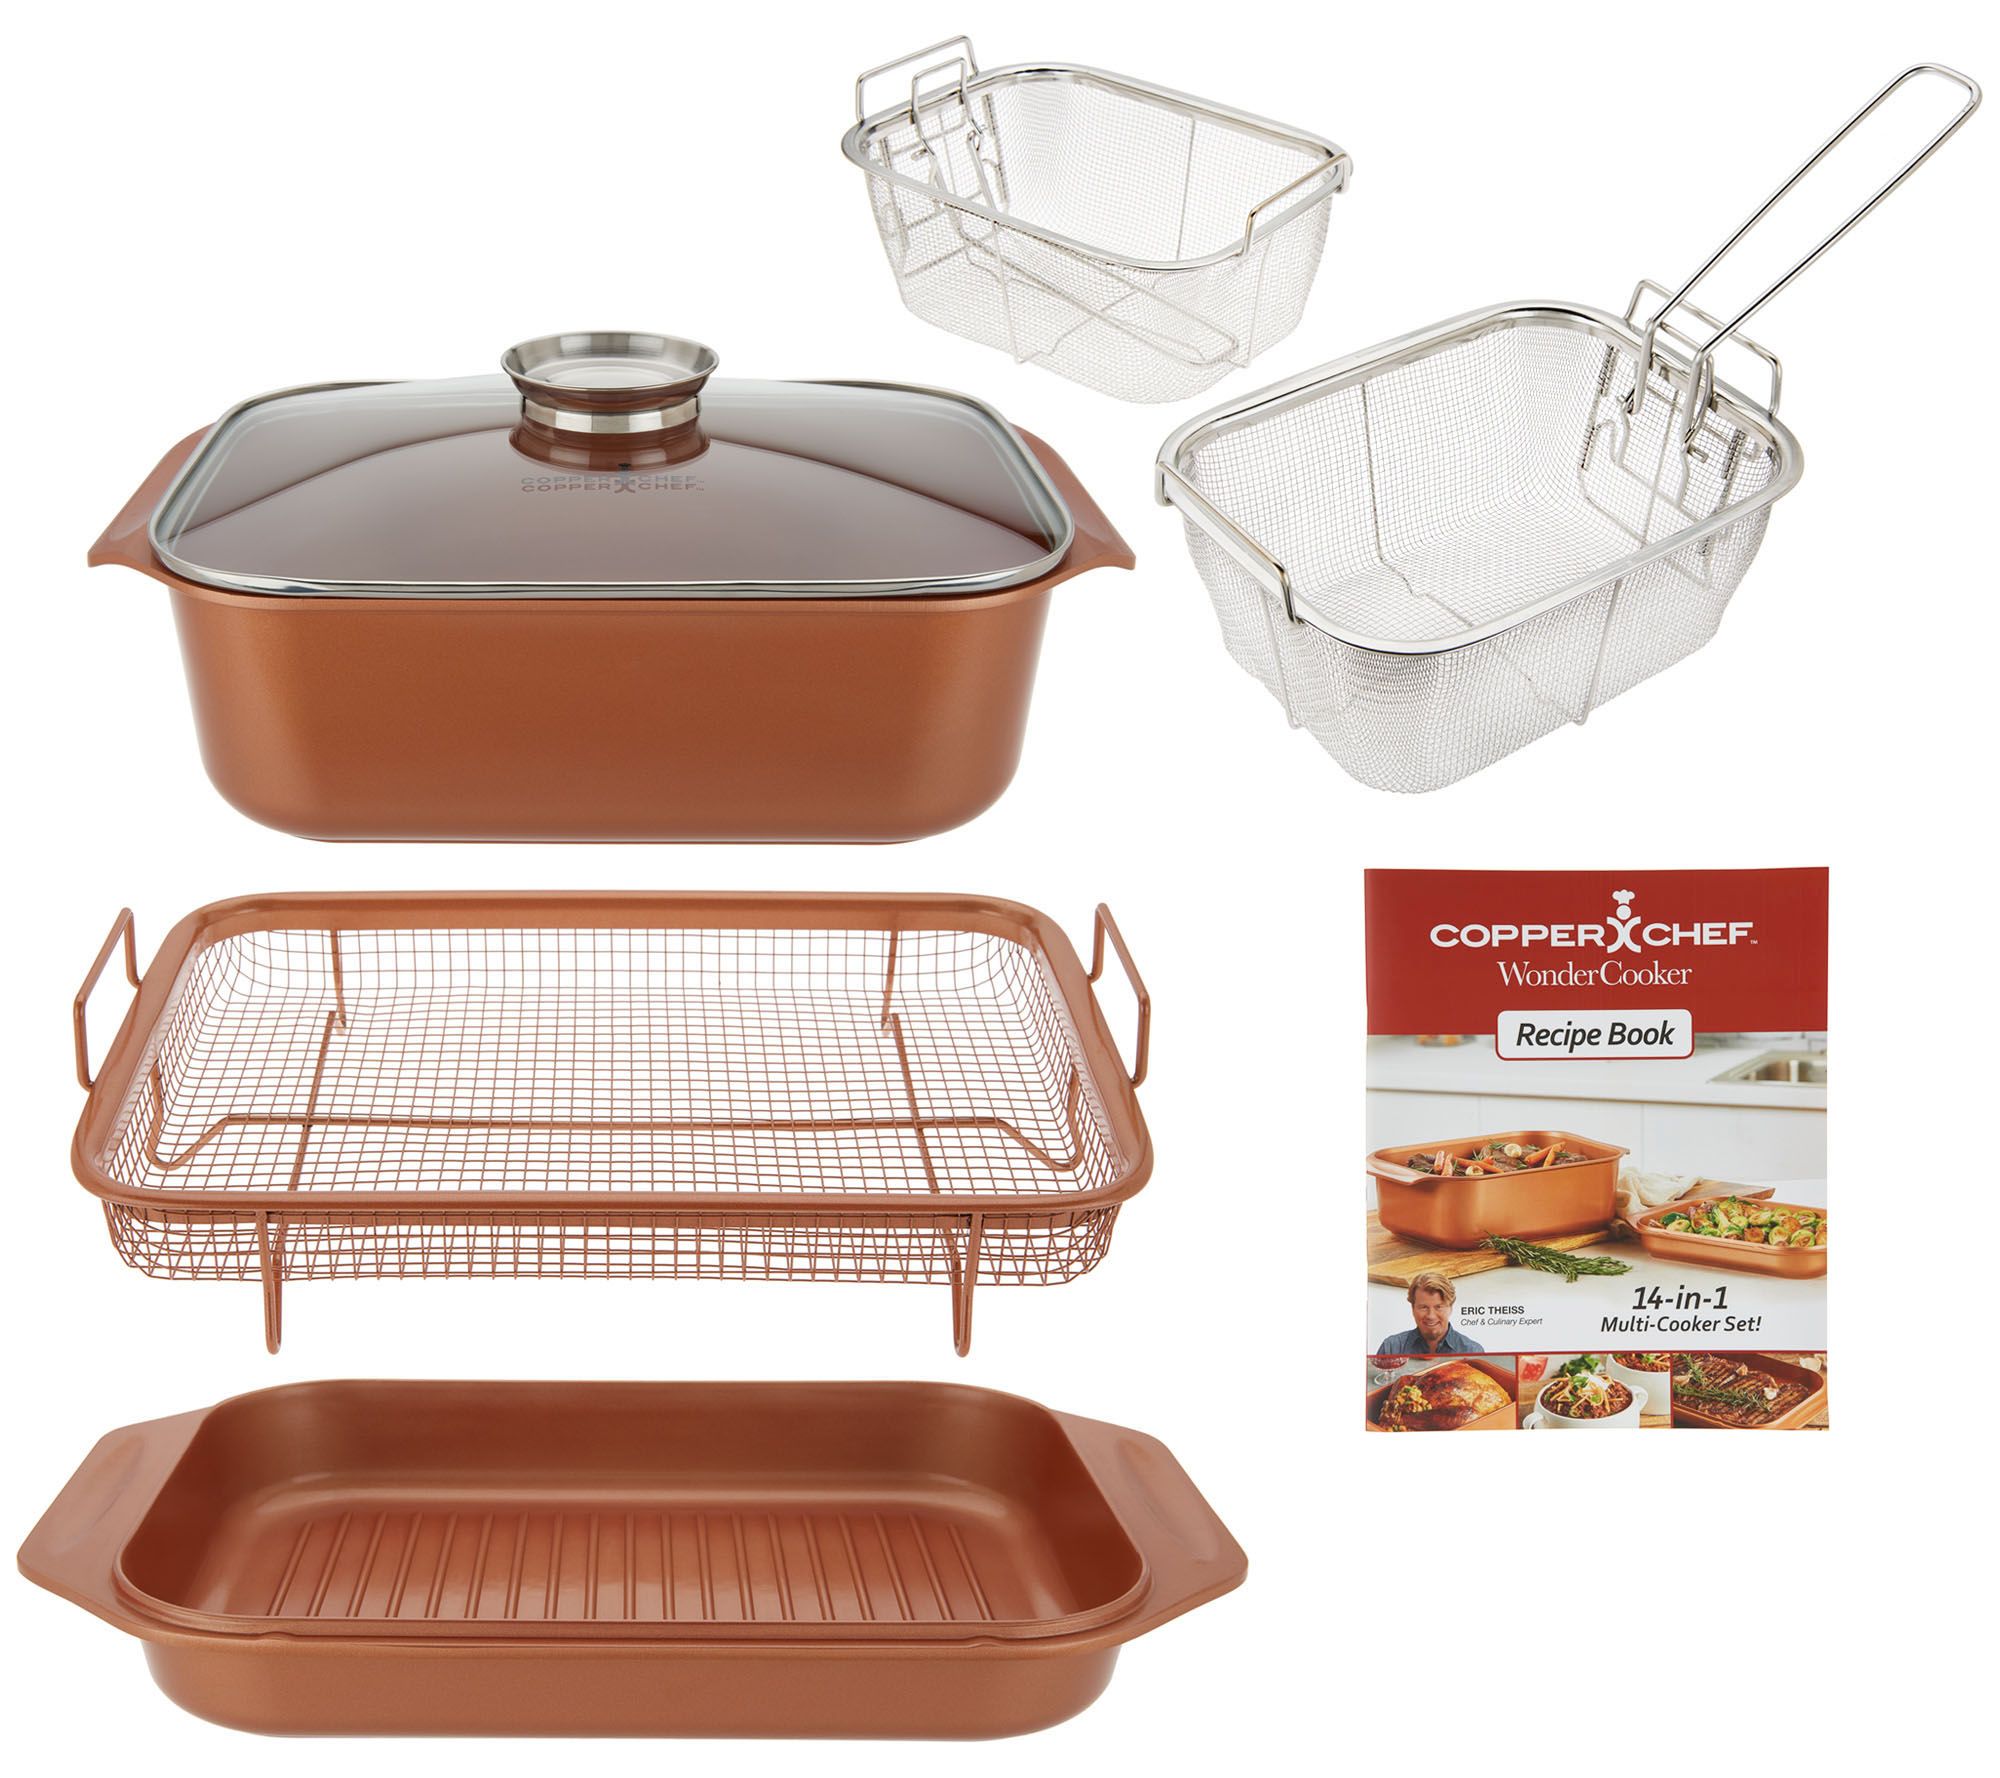 Copper Chef 7-piece 14-in-1 Wonder Cooker Cooking System - Page 1 — QVC.com